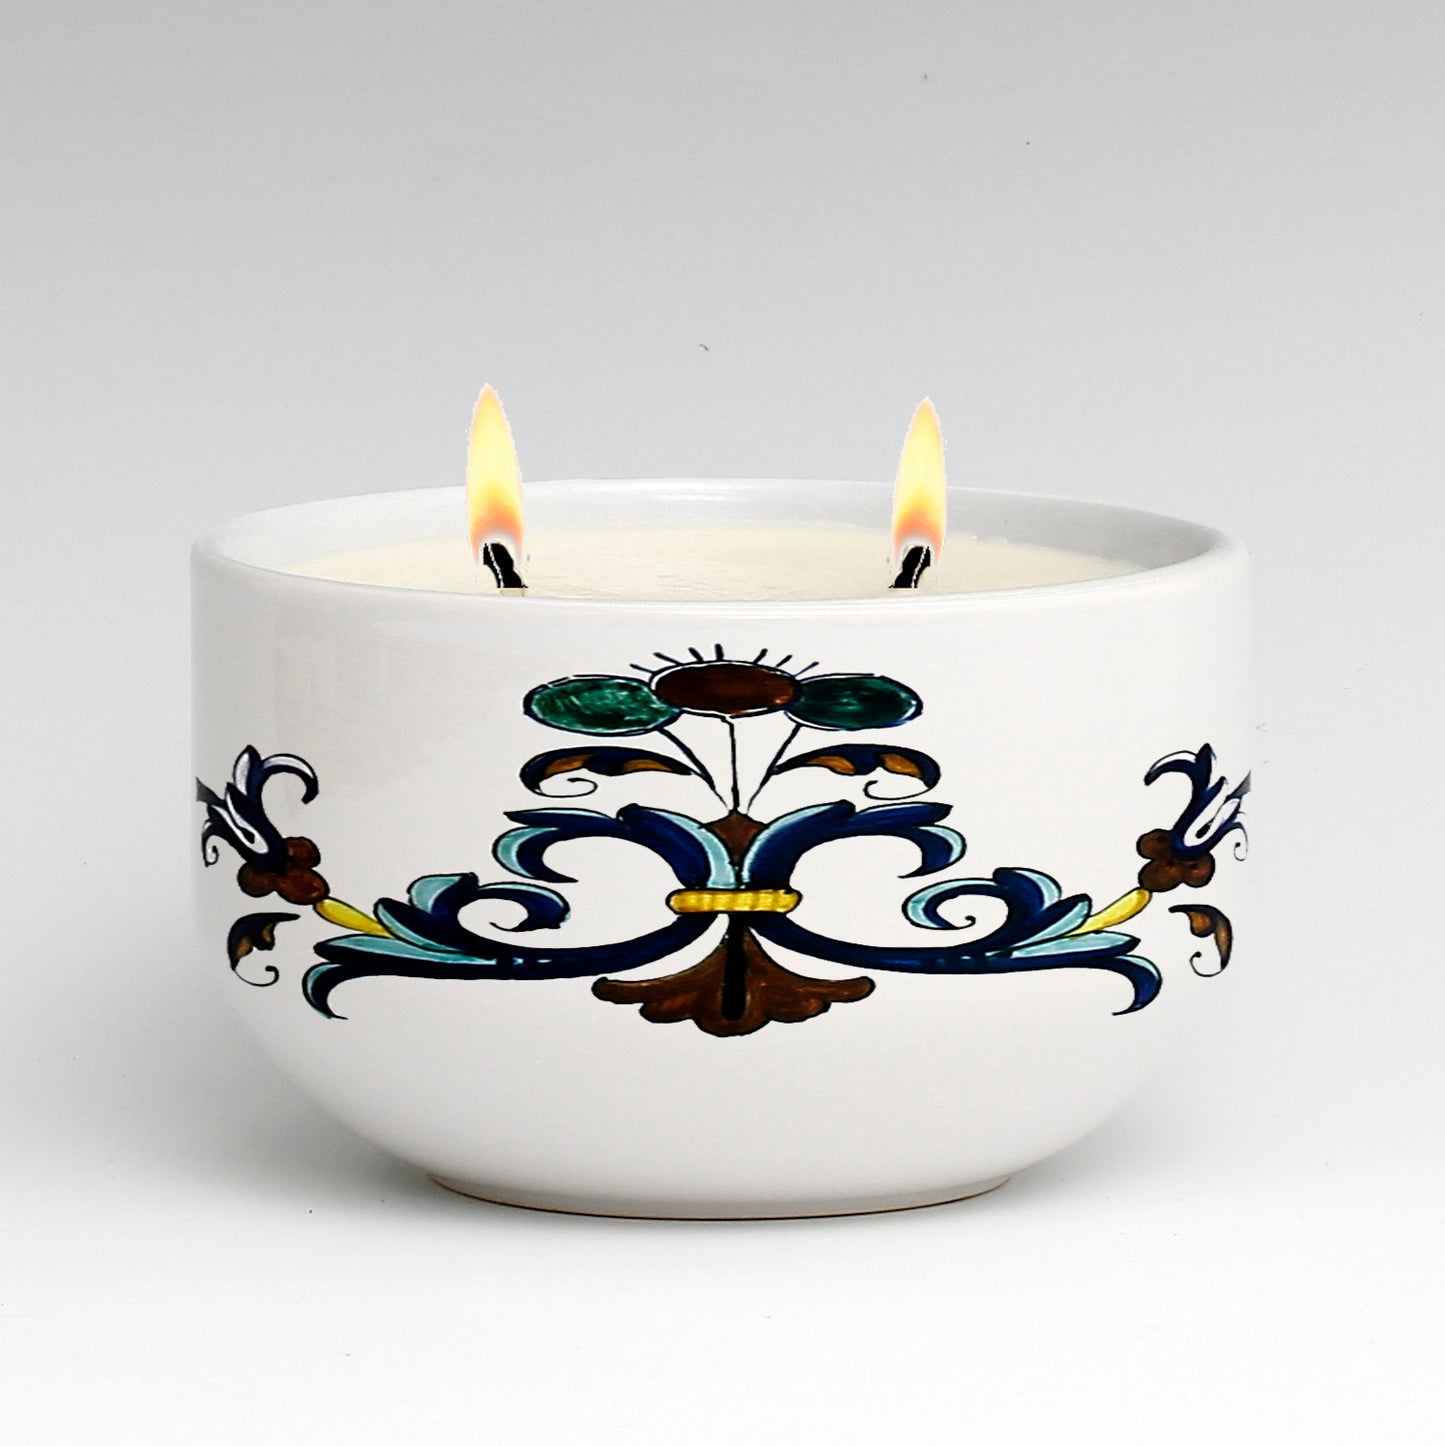 SUBLIMART: Two Wicks Soy Wax Candle in a Porcelain Bowl - Deruta Style (Design #DER05)